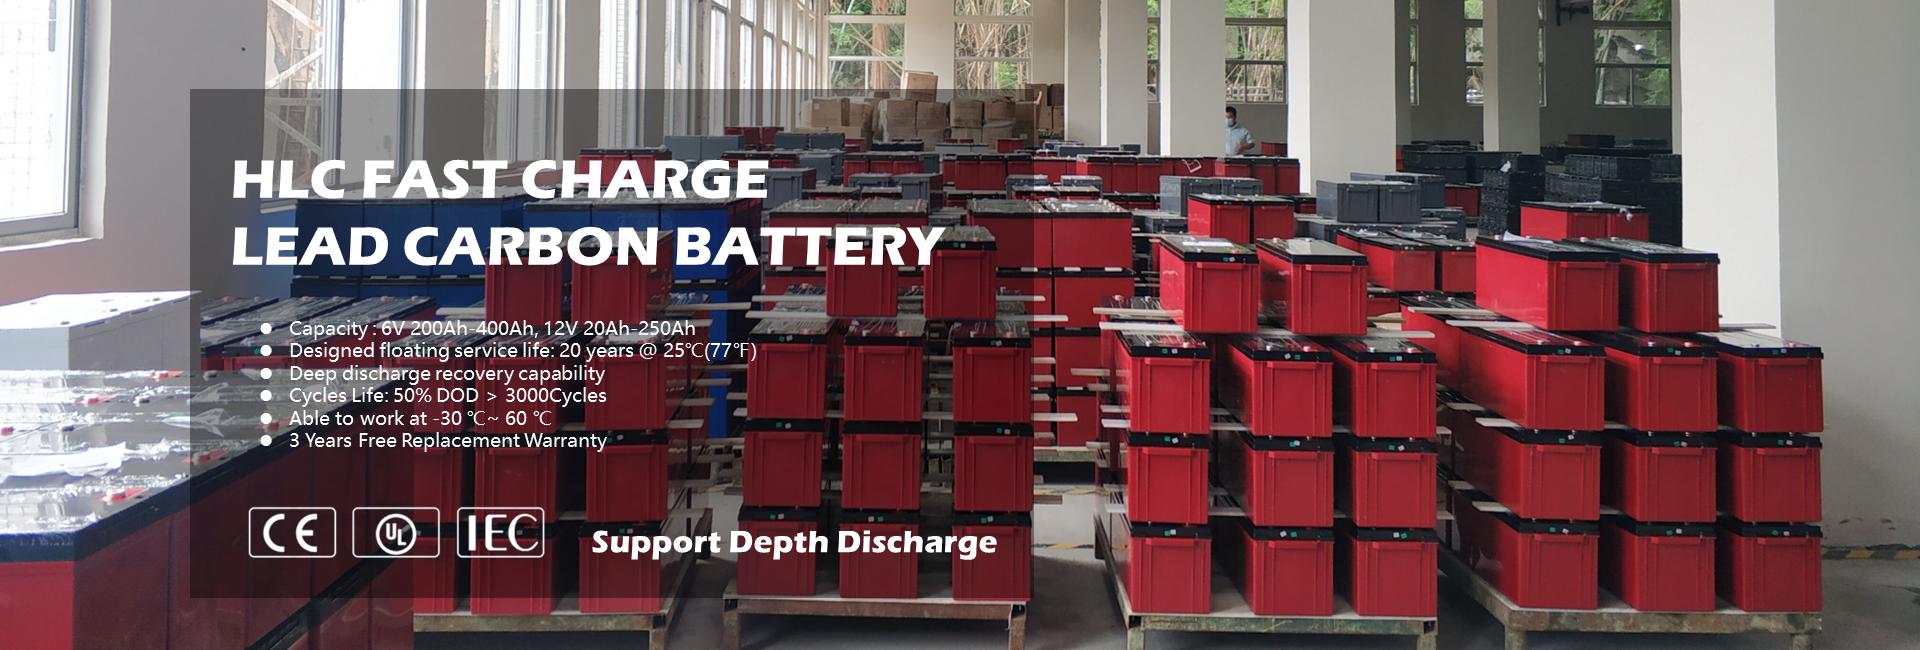 Fast Charge Lead Carbon Battery